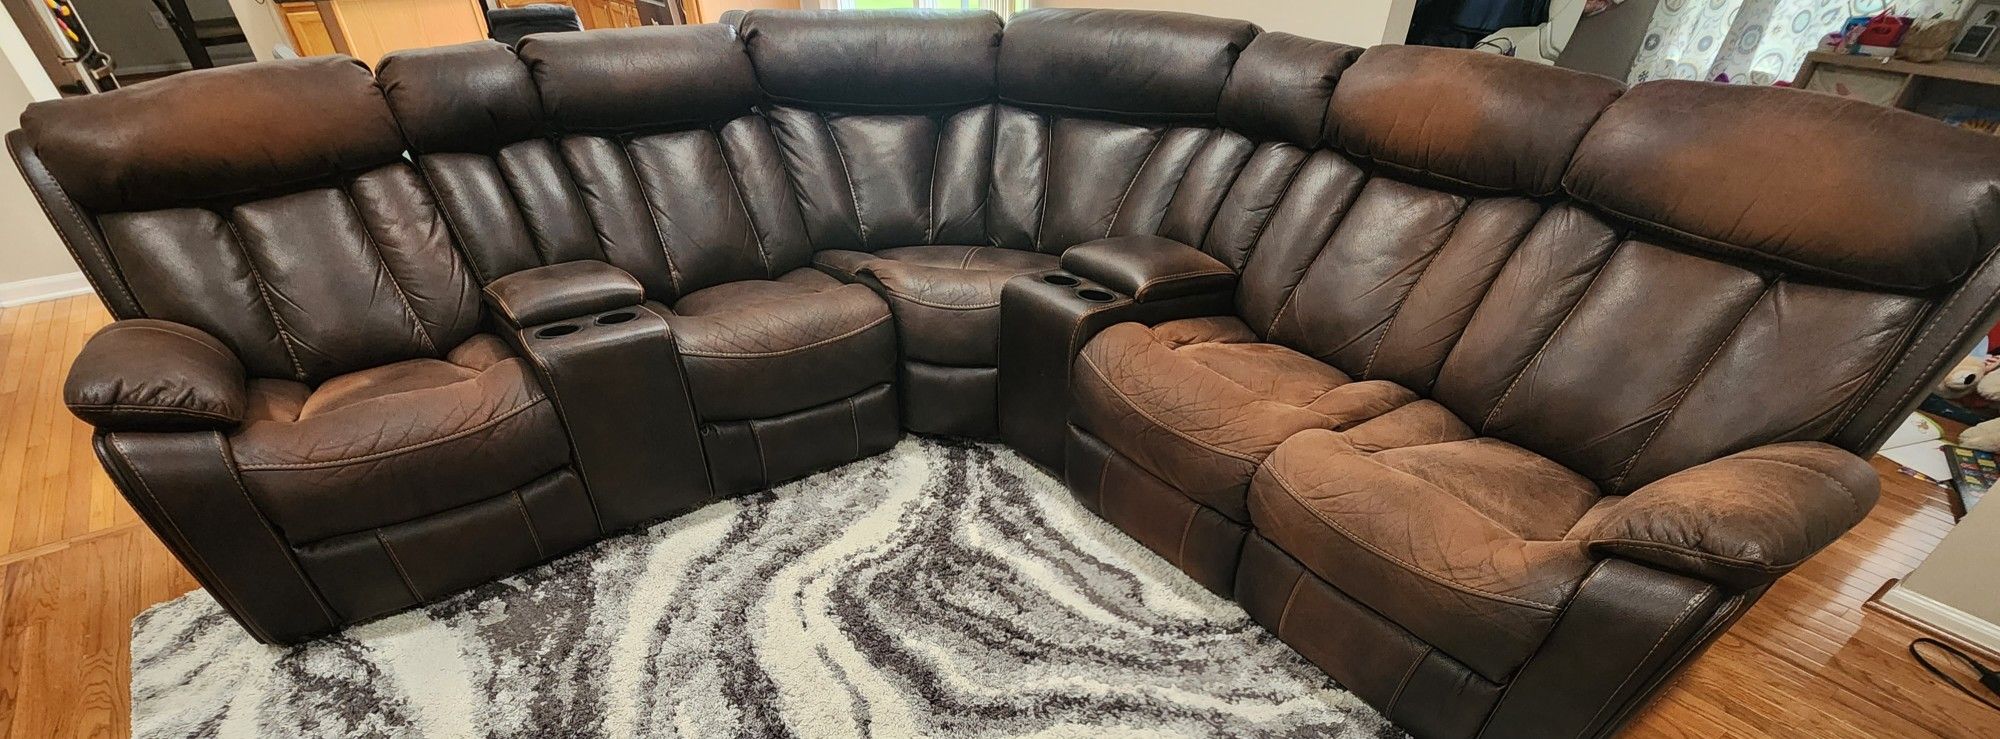 7 Piece Power recliner leather sectional. 3 power recliners with 4 cup holders and 4 usb charging